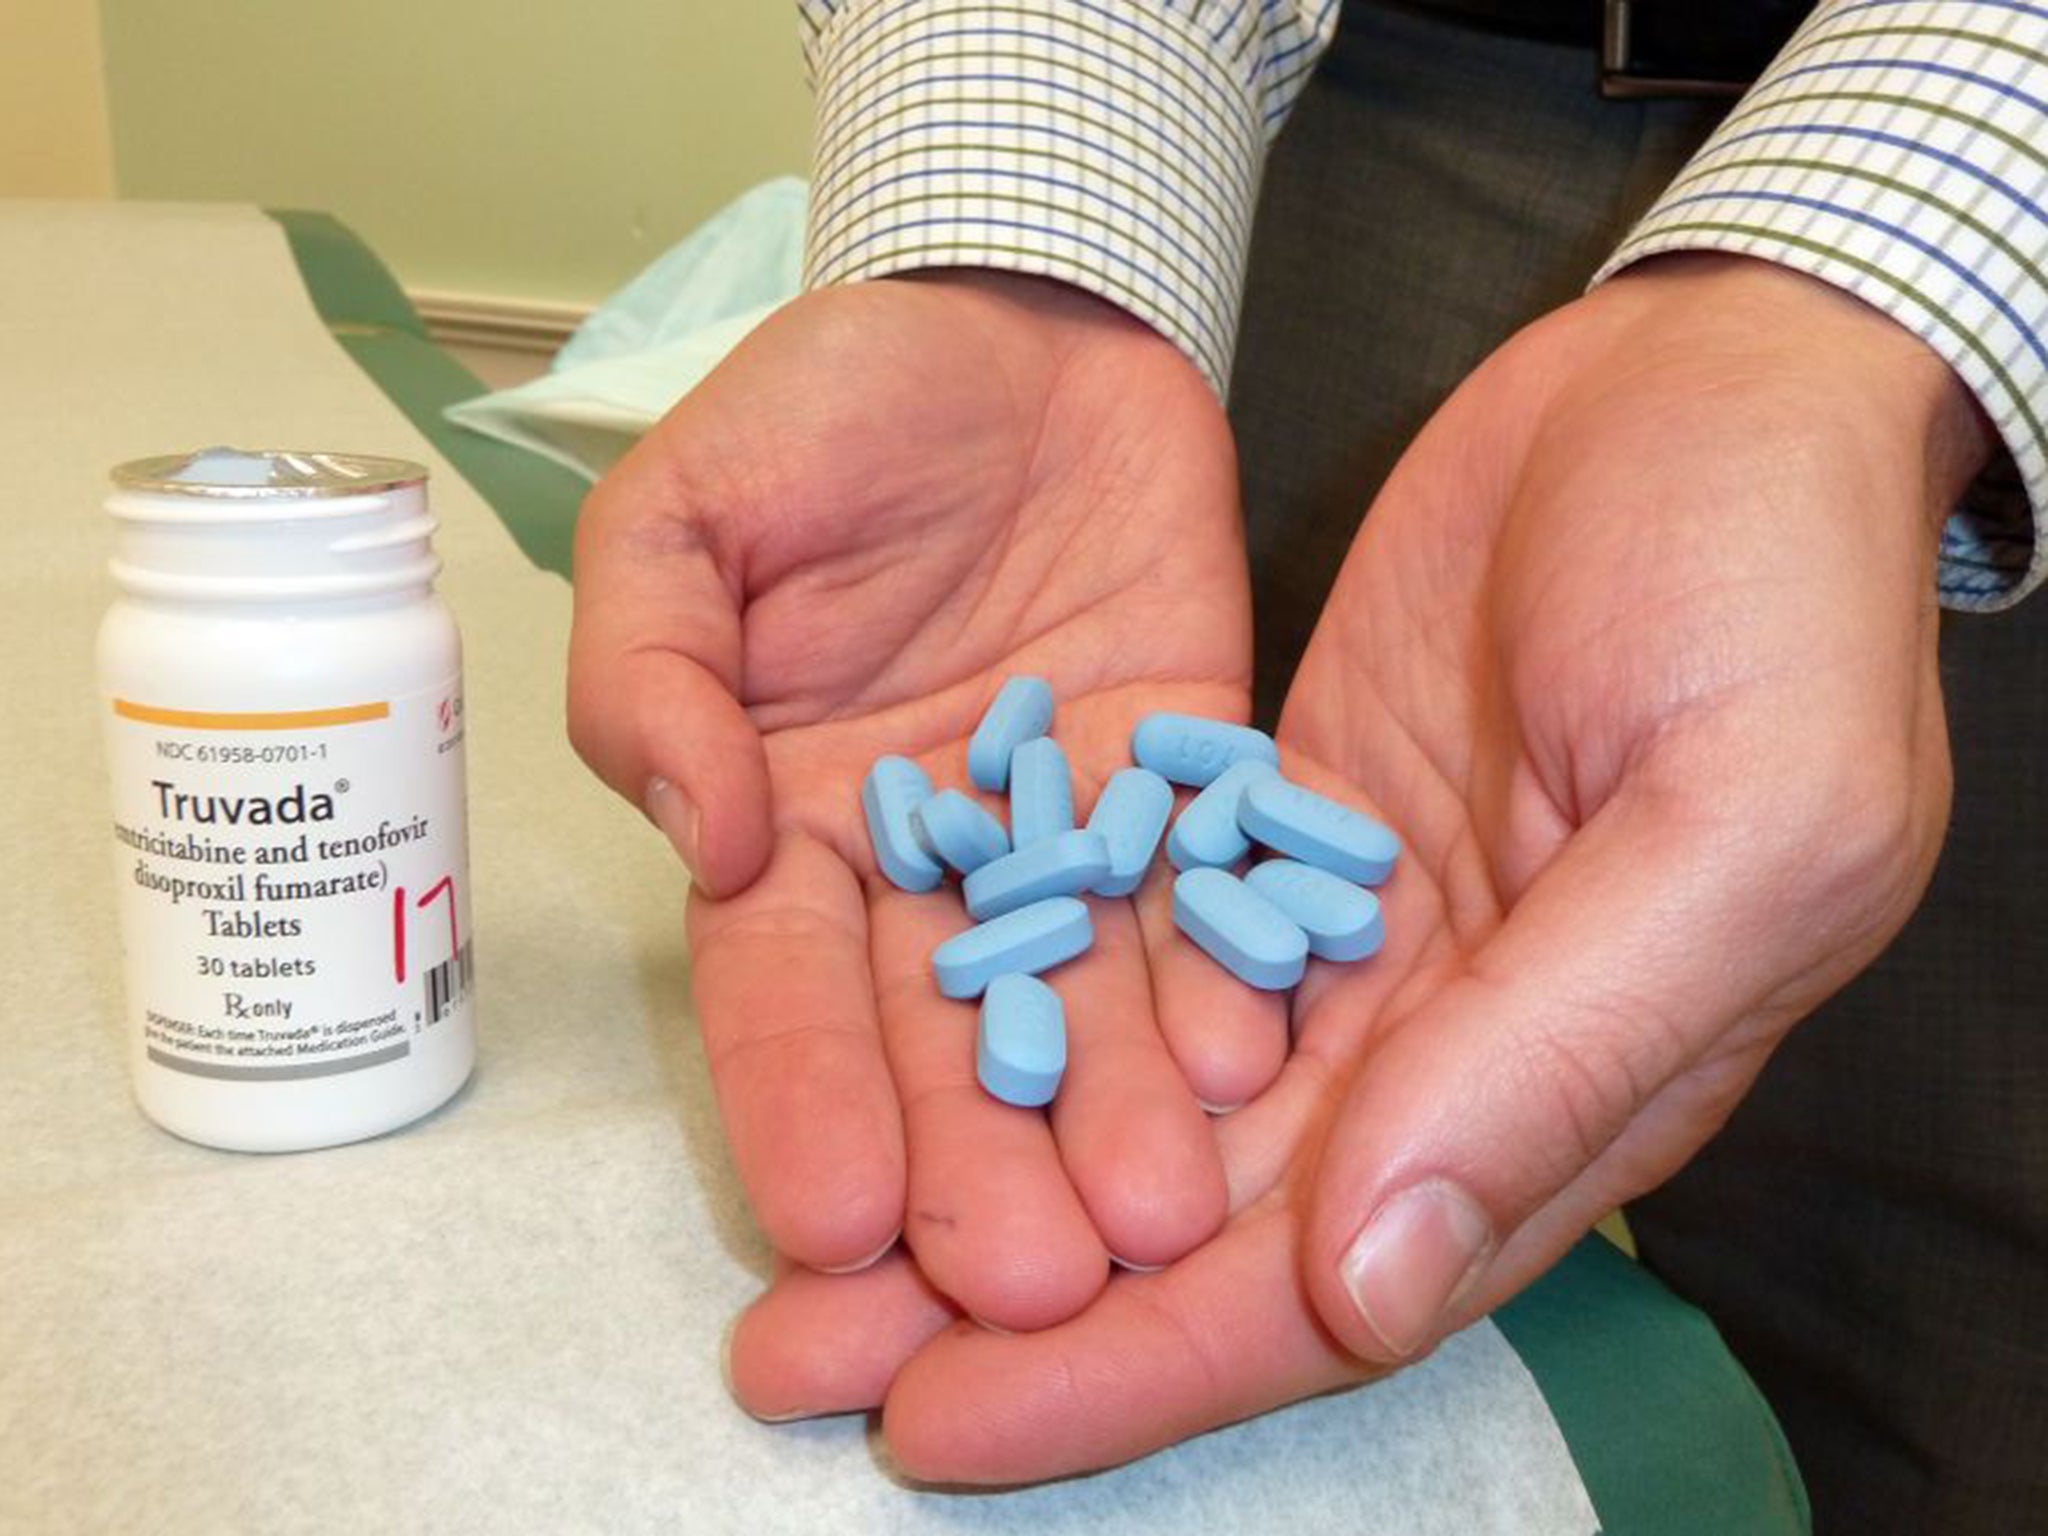 The Truvada pill reduces the risk of contracting HIV by up to 86 per cent